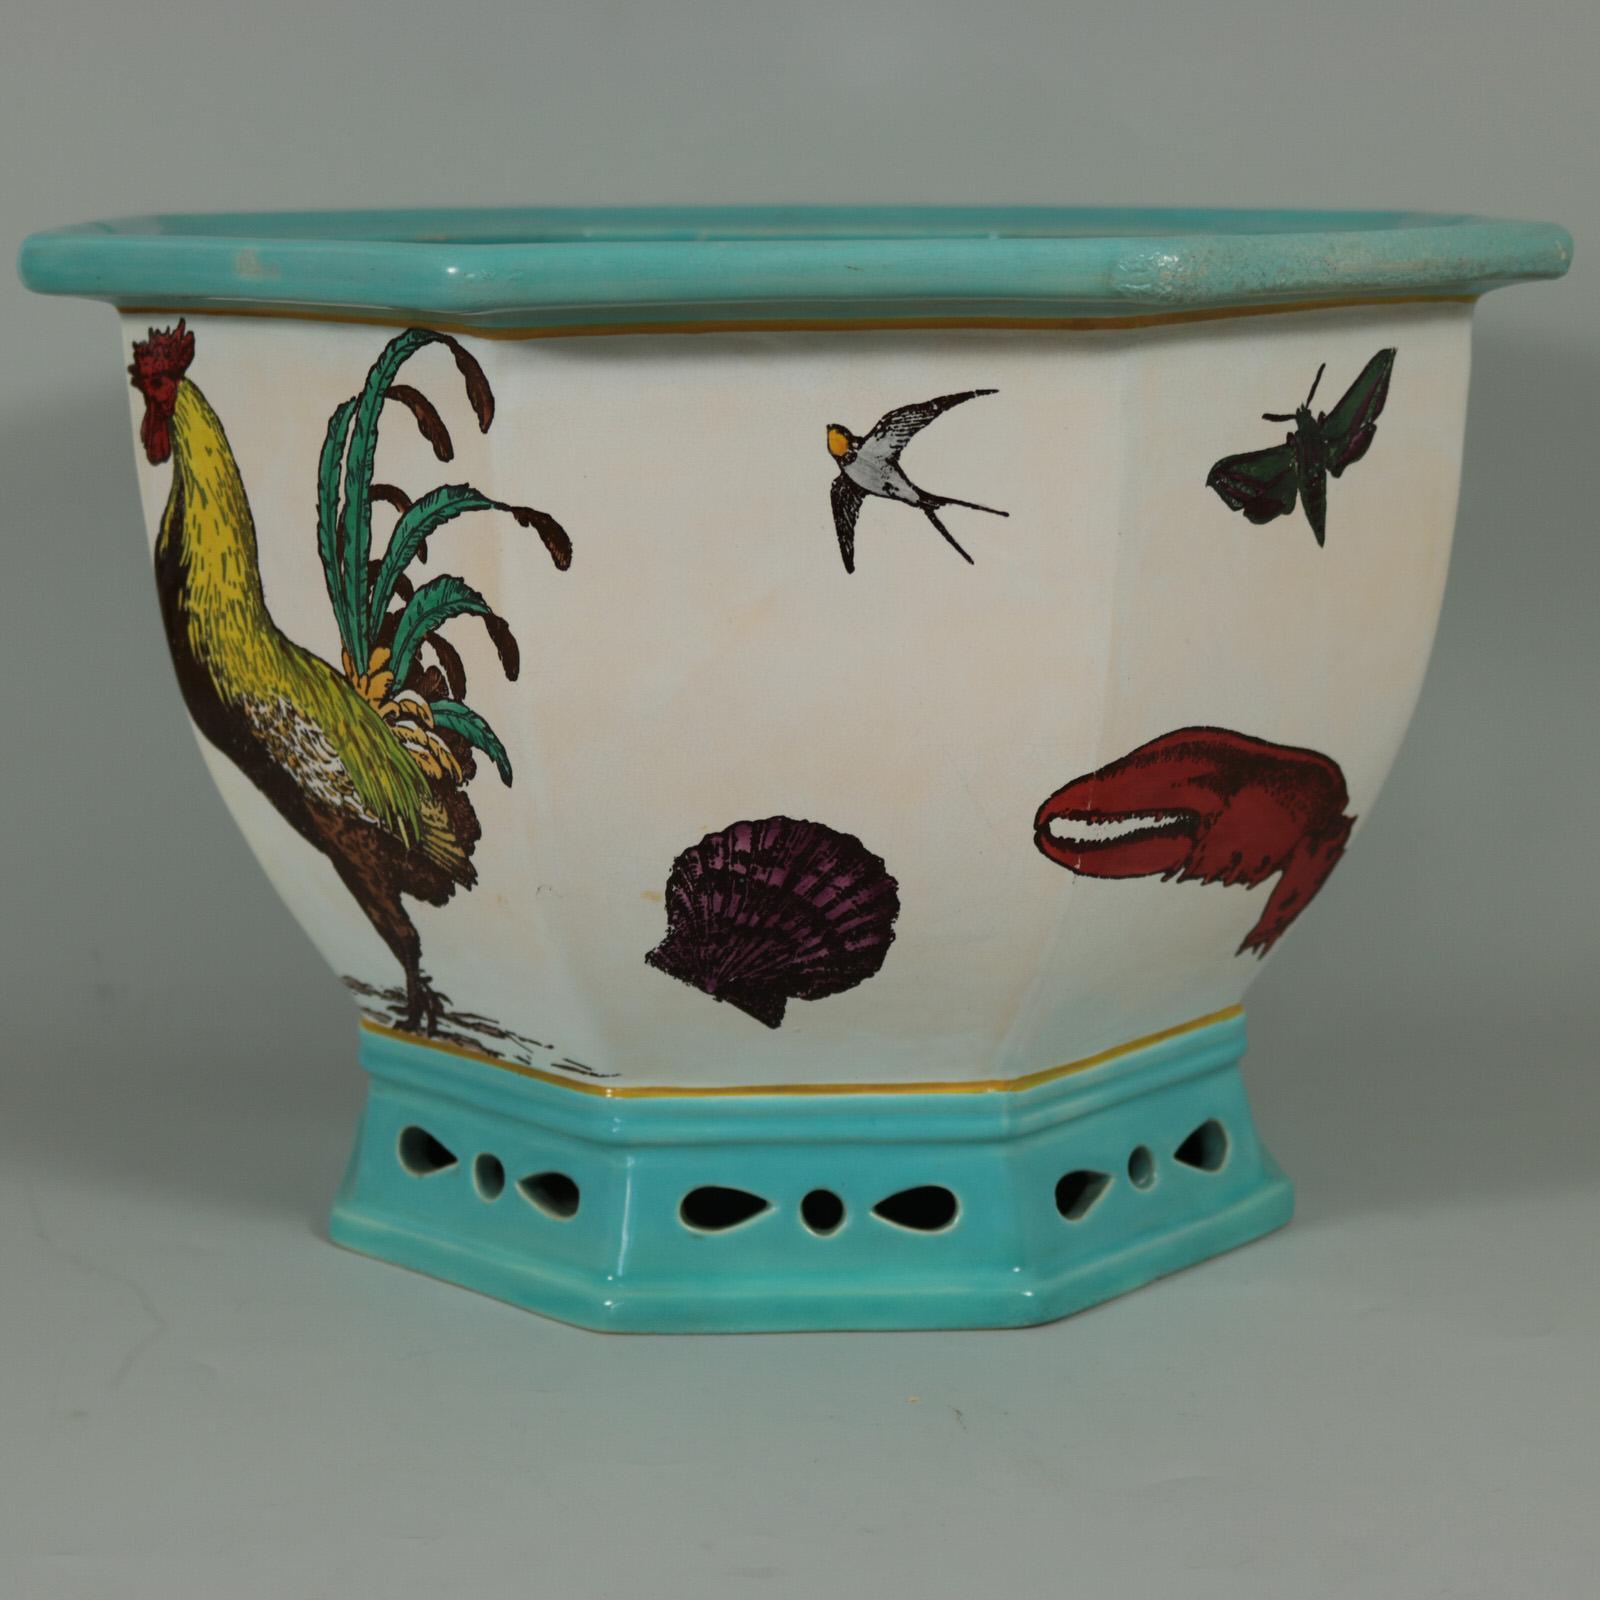 Minton Majolica jardinière which features illustrated flora and fauna, including: a cockerel, a kingfisher (bird), a flowering magnolia, a lobster claw, swallows, a bee, insects and flowers. Artist and designer, William Stephen Coleman, was paid